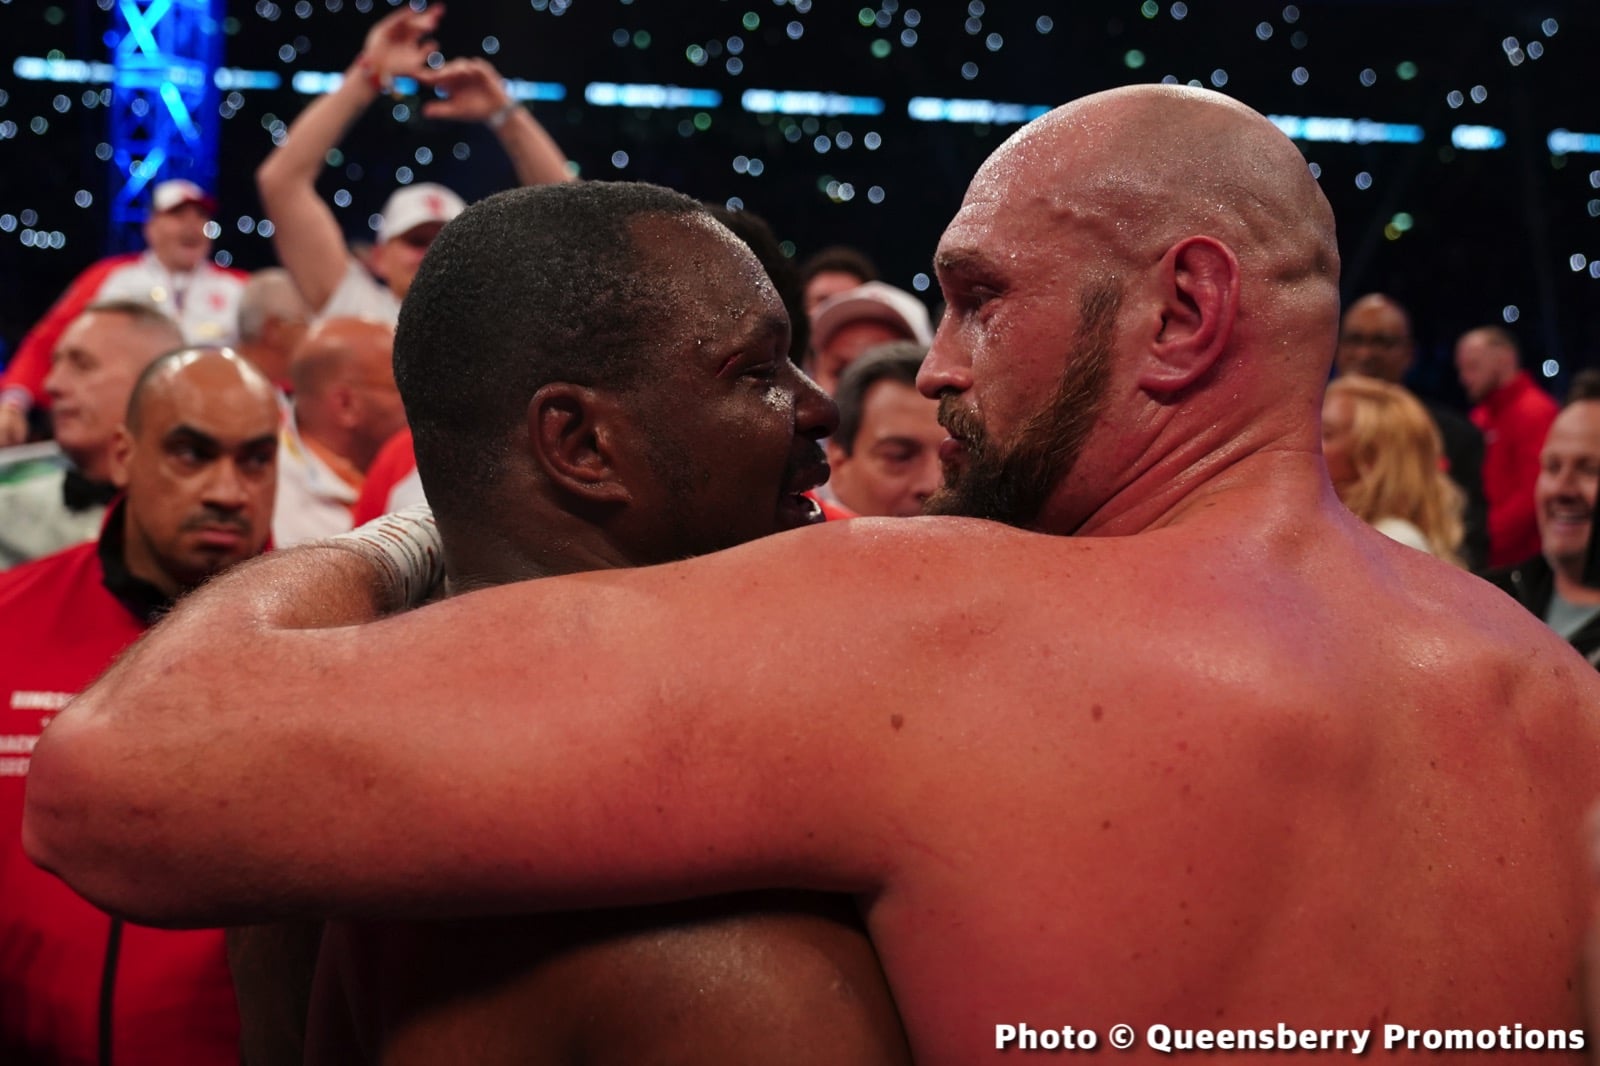 Tyson Fury Ends A Messy Fight With A Perfect Right Uppercut, Takes Out Dillian Whyte In 6 - Boxing Results